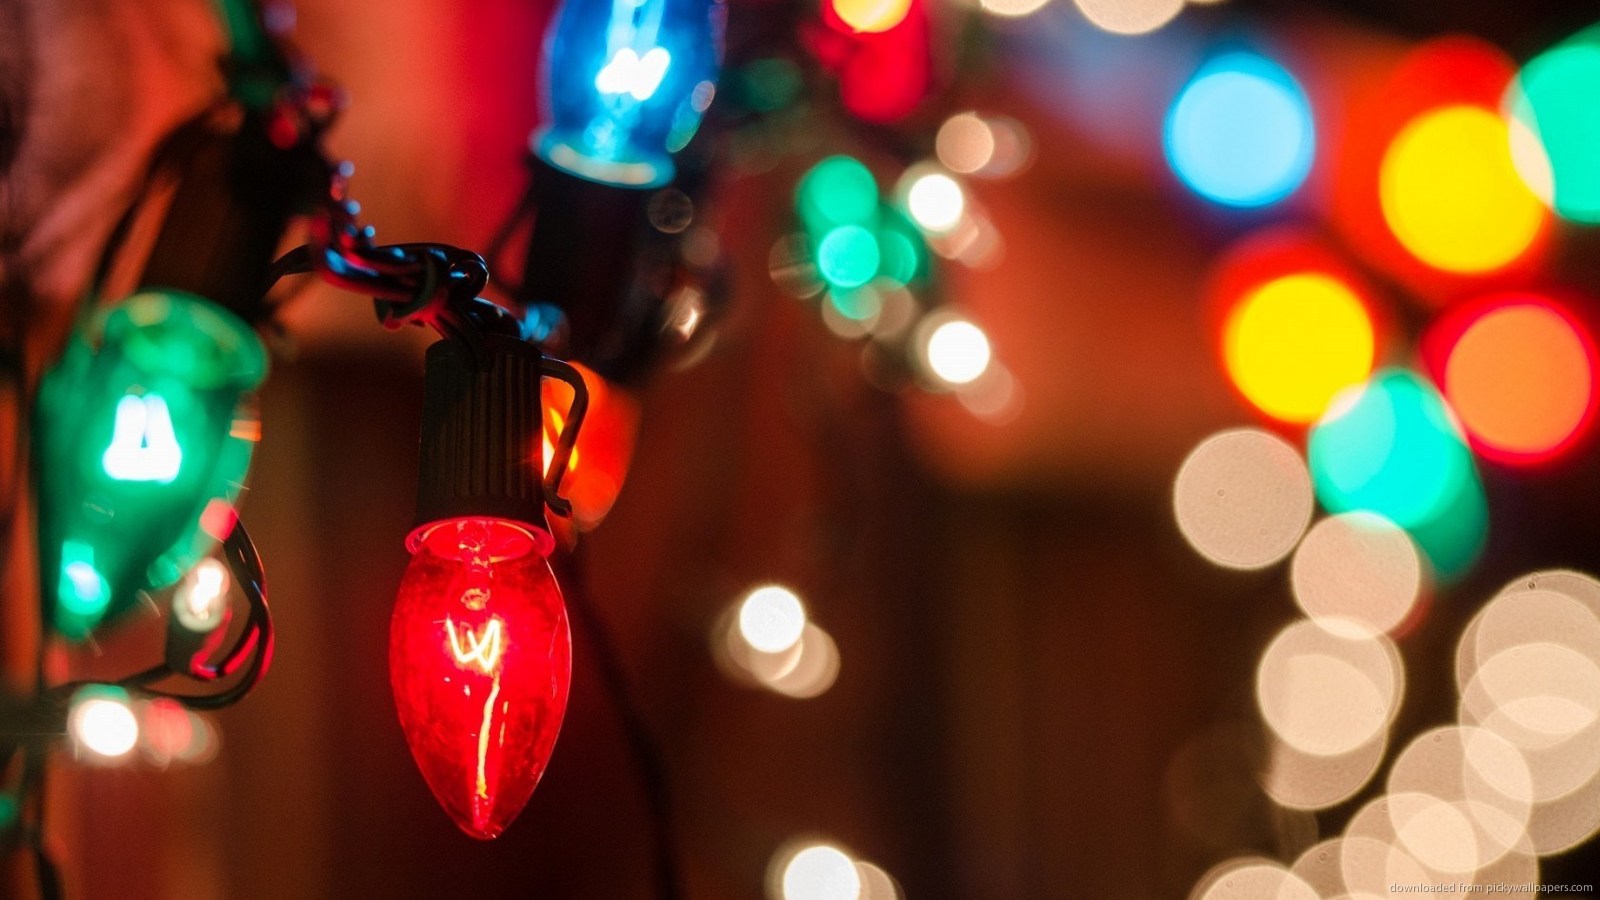 Download 1600x900 Colorful Holiday Lights Up Close Wallpaper Wallpaper